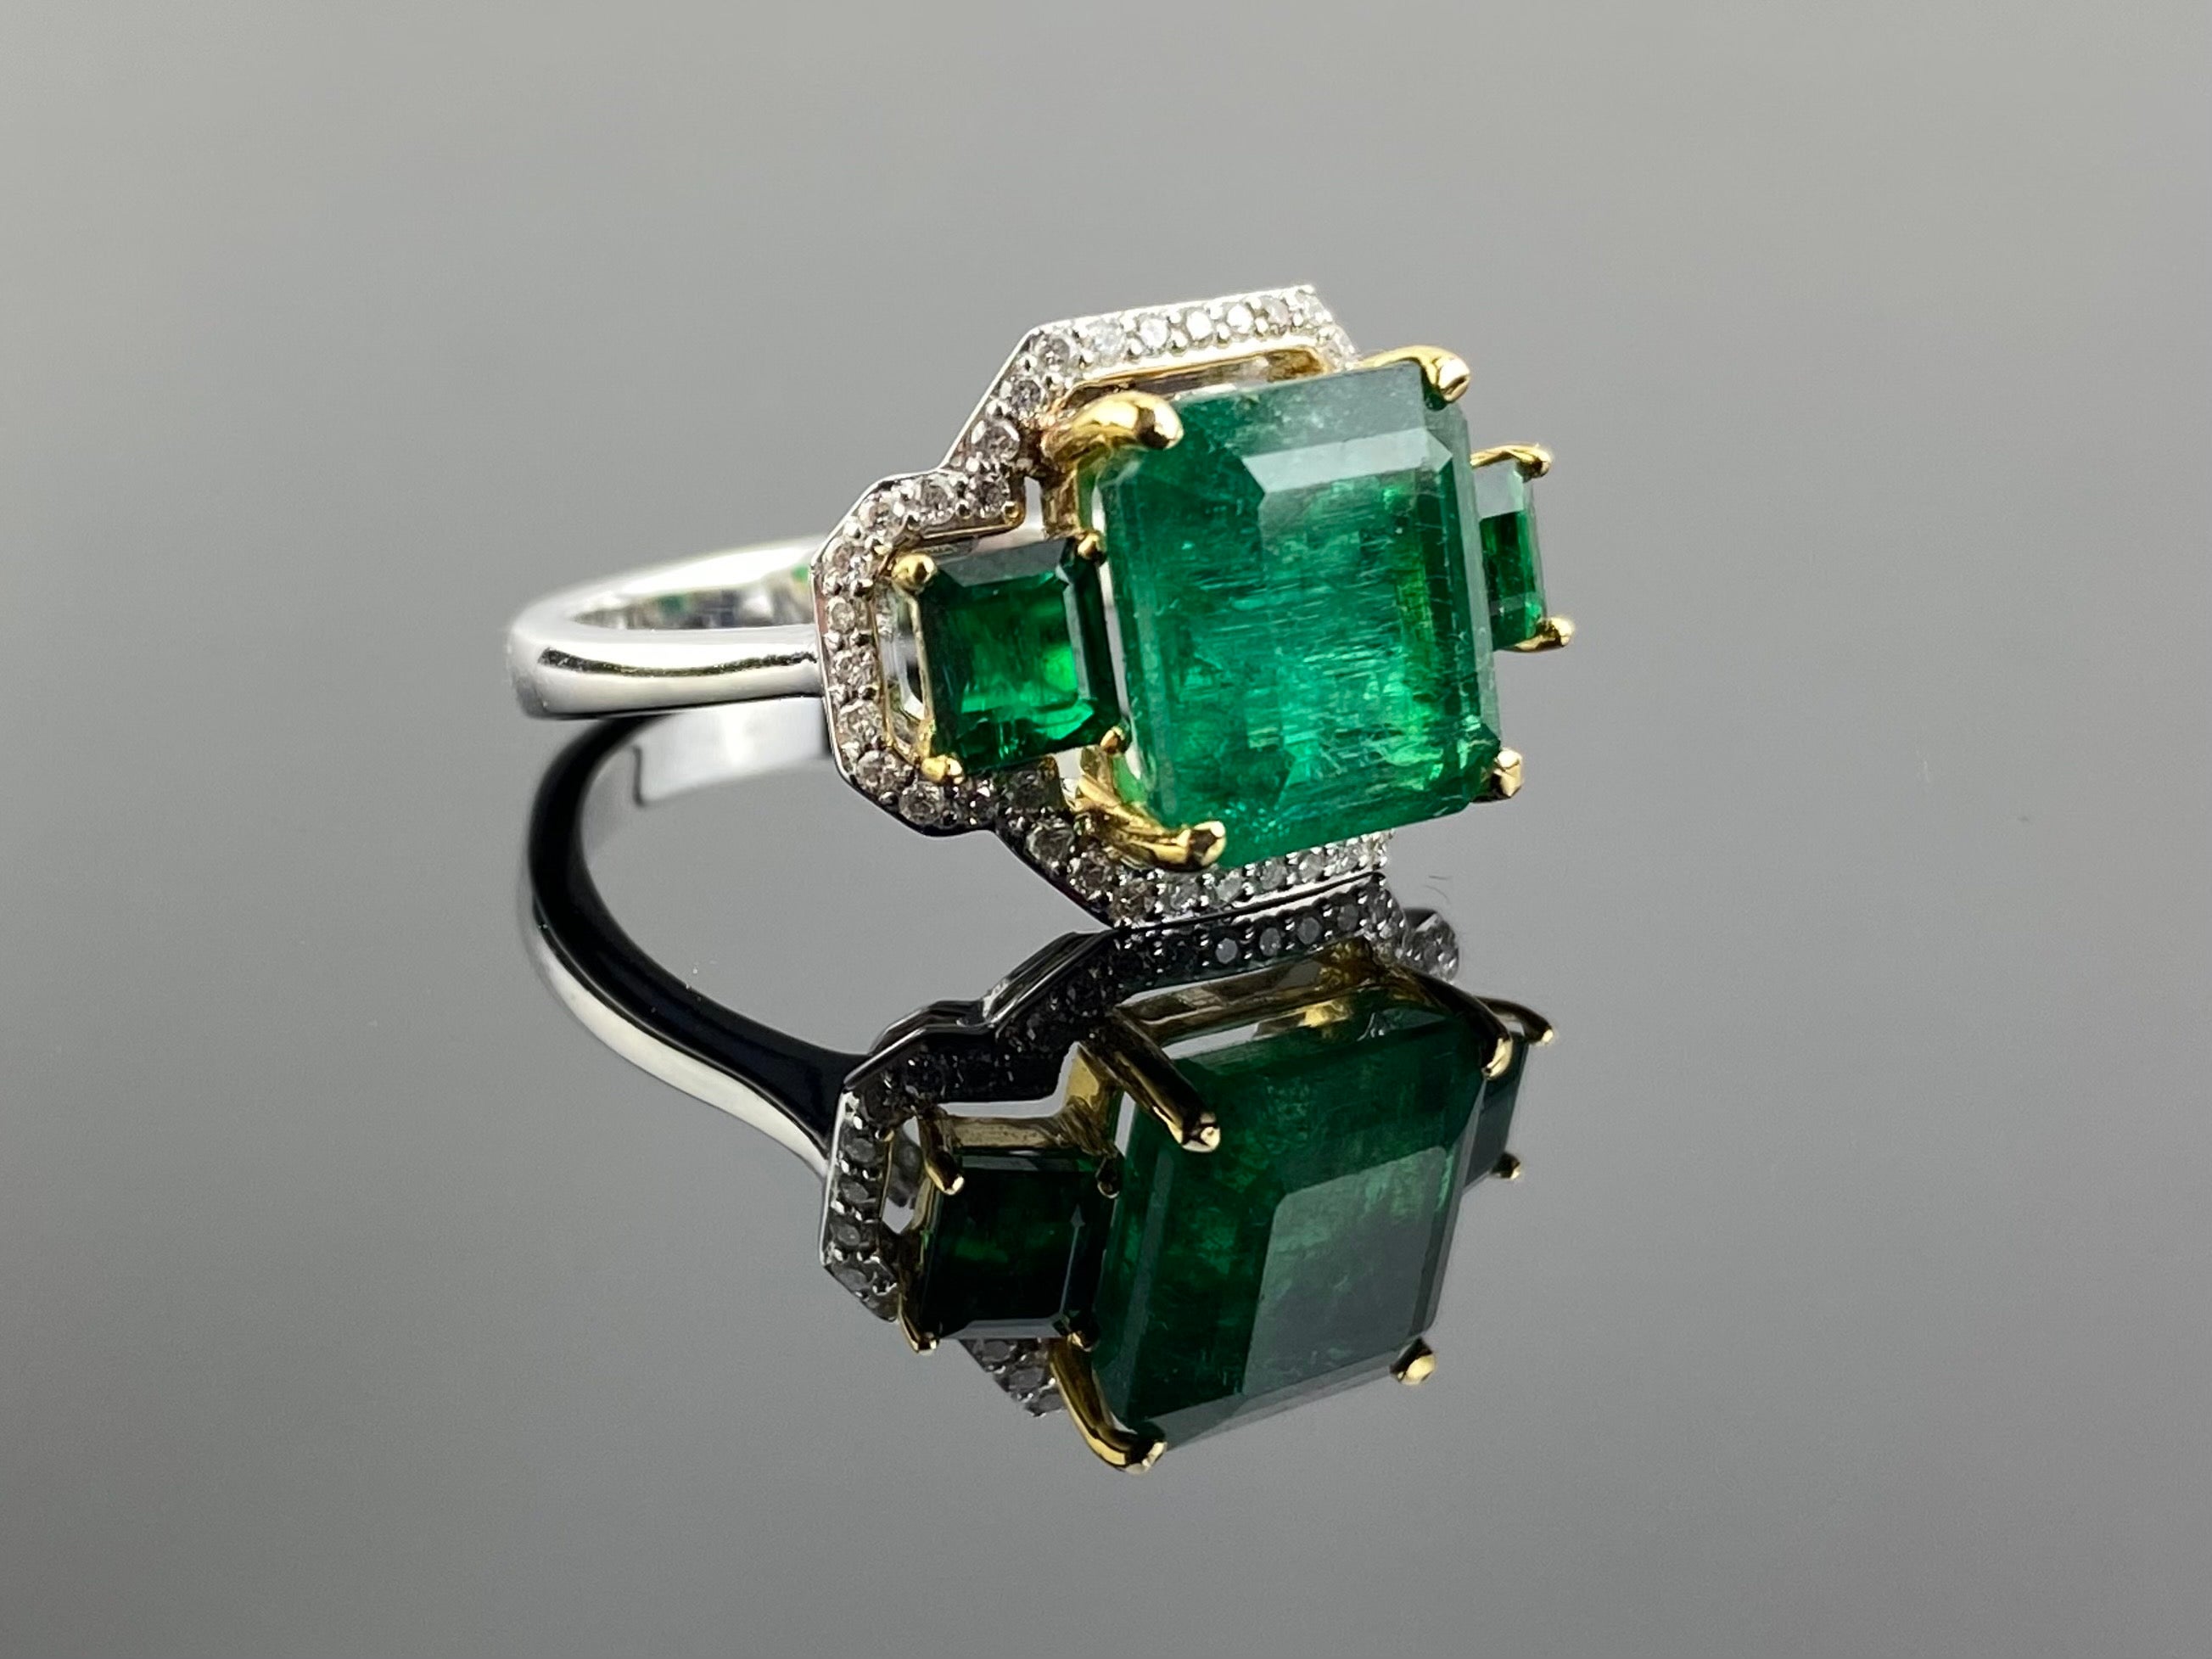 A unique three stone cocktail ring, with 4.31 carat natural Zambian Emerald and 0.76 carat natural Zambian Emerald side stones, with 0.23 carat White Diamond halo all set in solid 18K White Gold. The Emeralds are transparent and have a beautiful